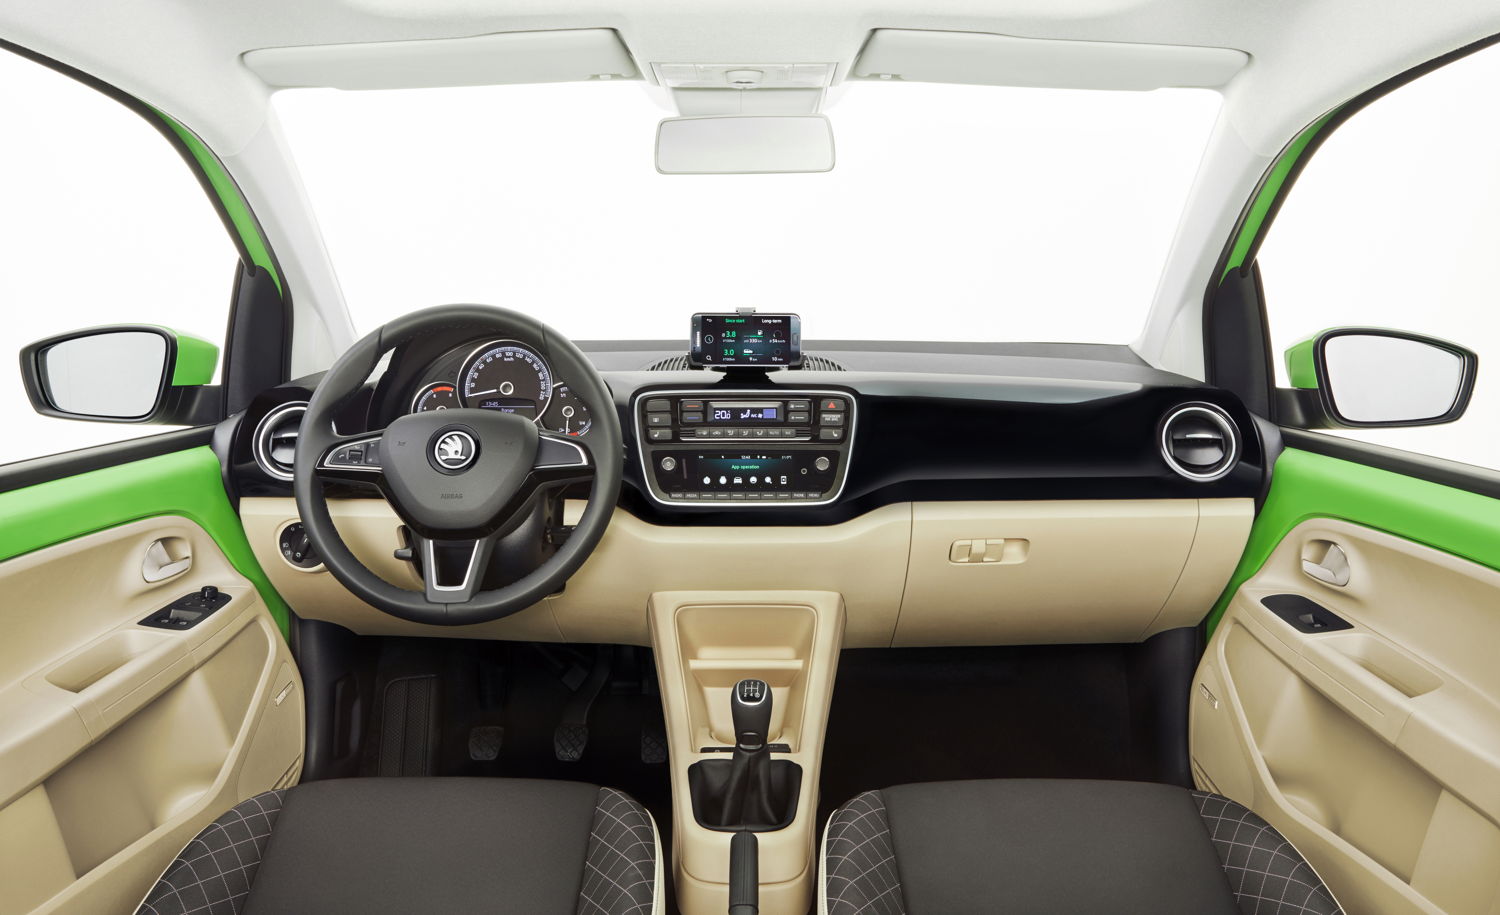 The interior of the ŠKODA CITIGO comes across as young and tidy: with a new instrument cluster in the two-colour dashboard, a multifunction leather steering wheel and seats with integrated headrests.